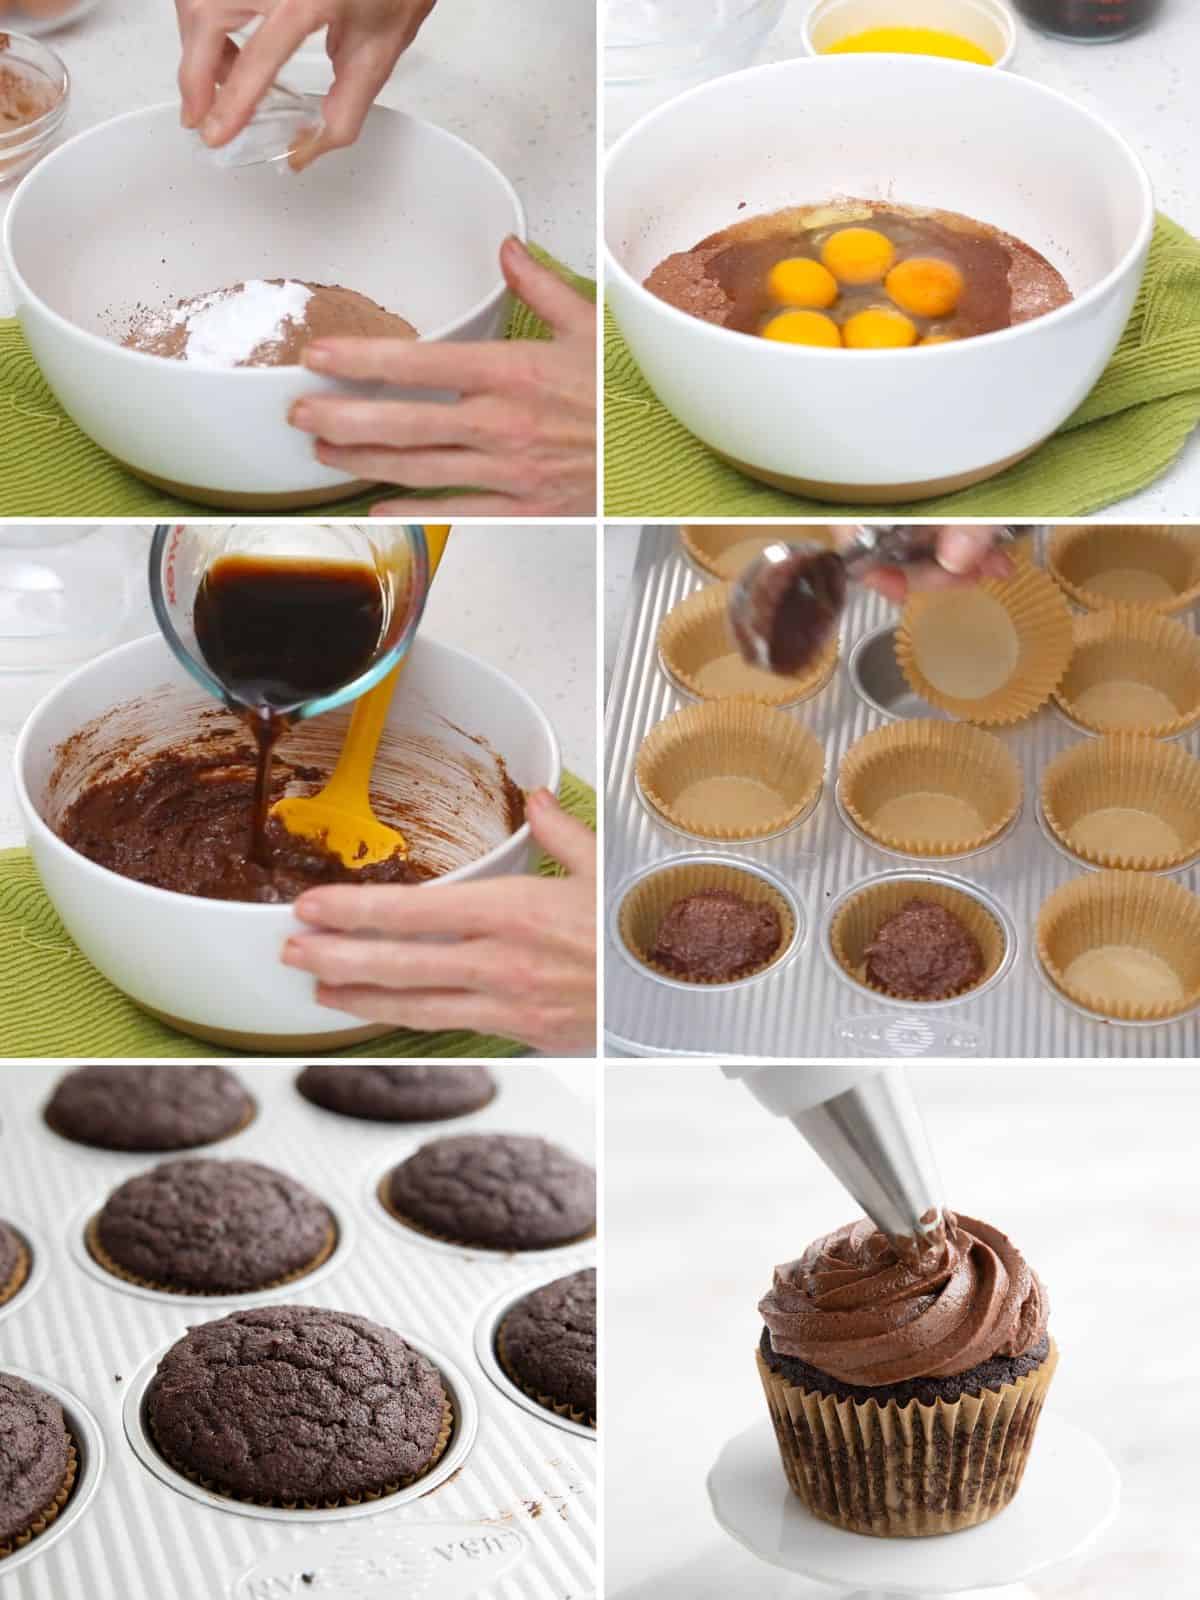 A collage of 6 images showing how to make keto cupcakes.